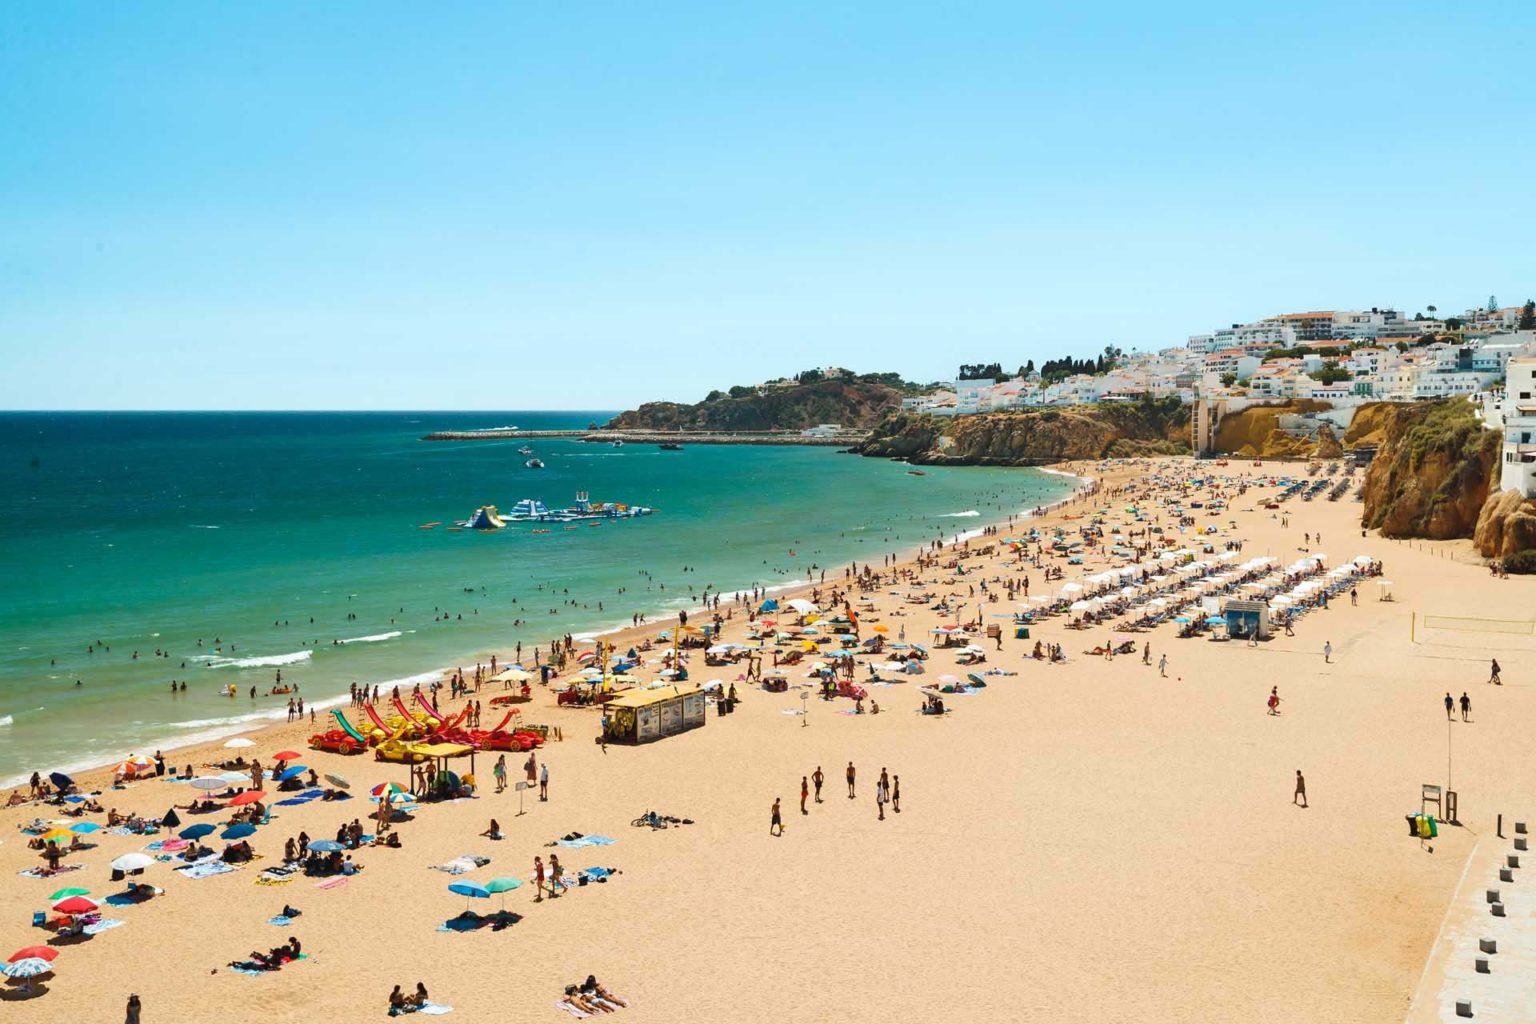 Viewpoint of the Miradouro do Pau da Bandeira looking out at a crowded beach in Albufeira, Portugal